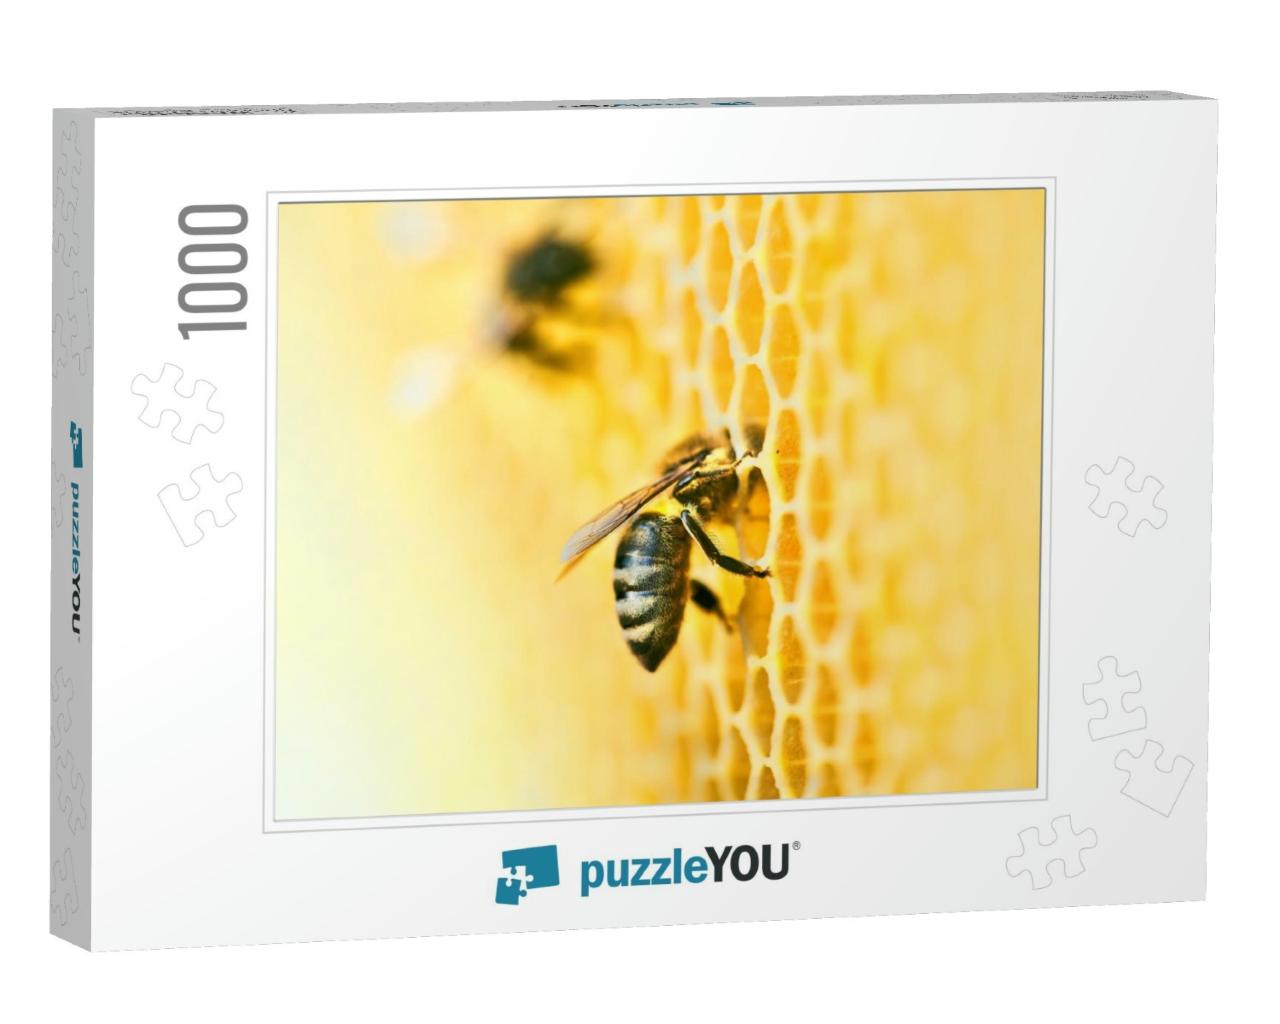 Macro Photo of a Bee Hive on a Honeycomb with Copy Space... Jigsaw Puzzle with 1000 pieces